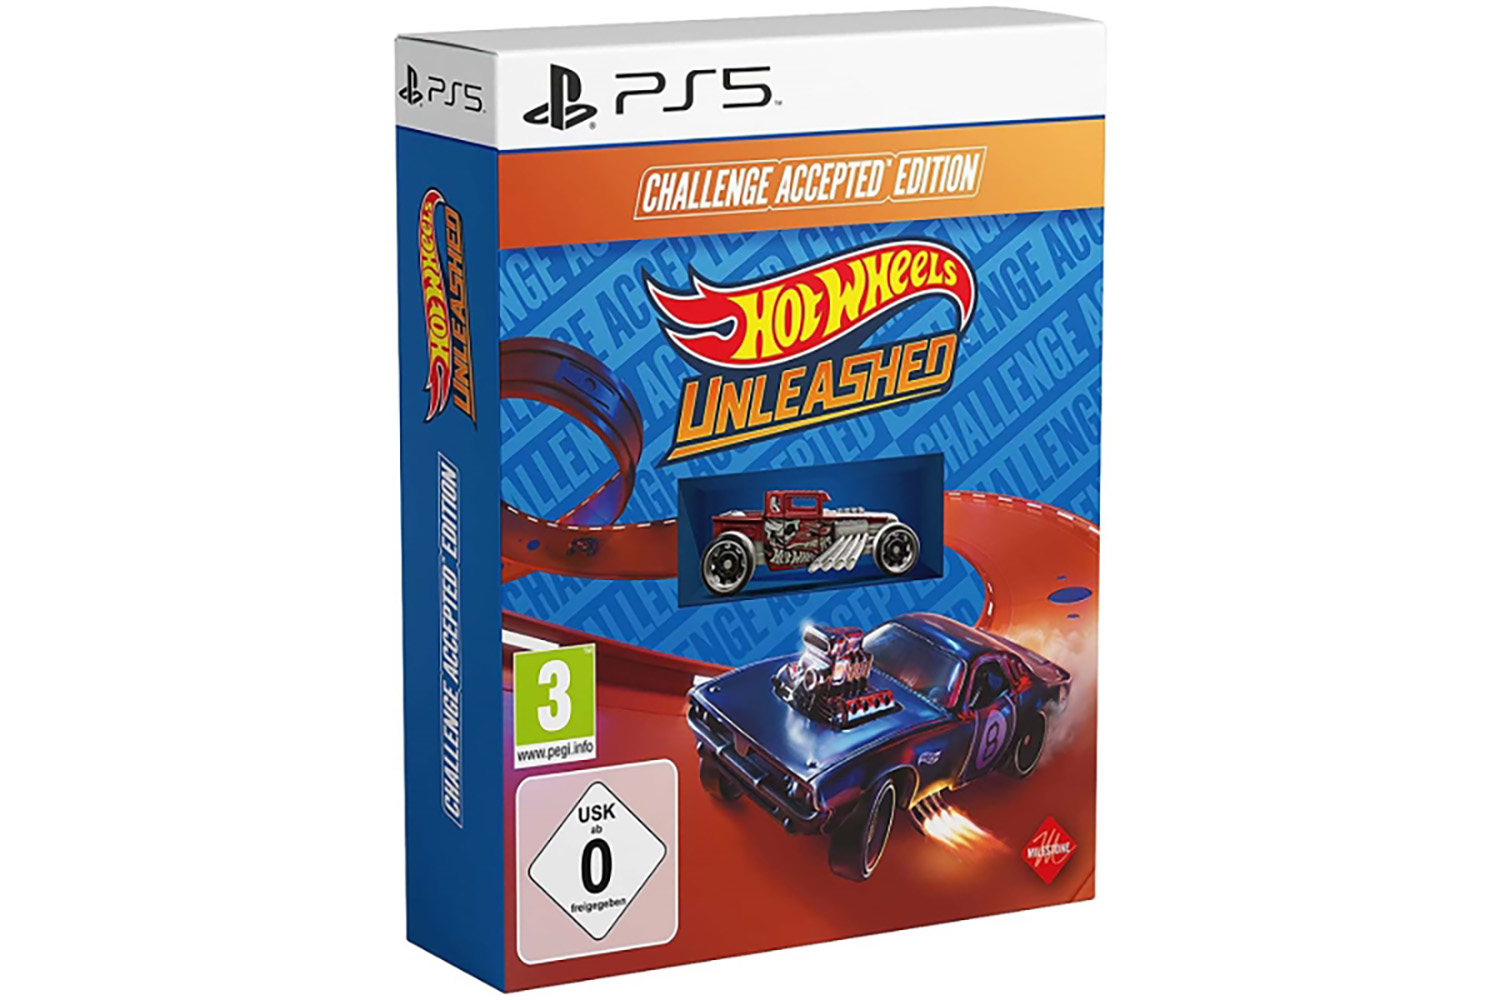 HOT WHEELS UNLEASHED. Challenge Accepted Edition игра для PlayStation 5 [PS5GHWUCAE]